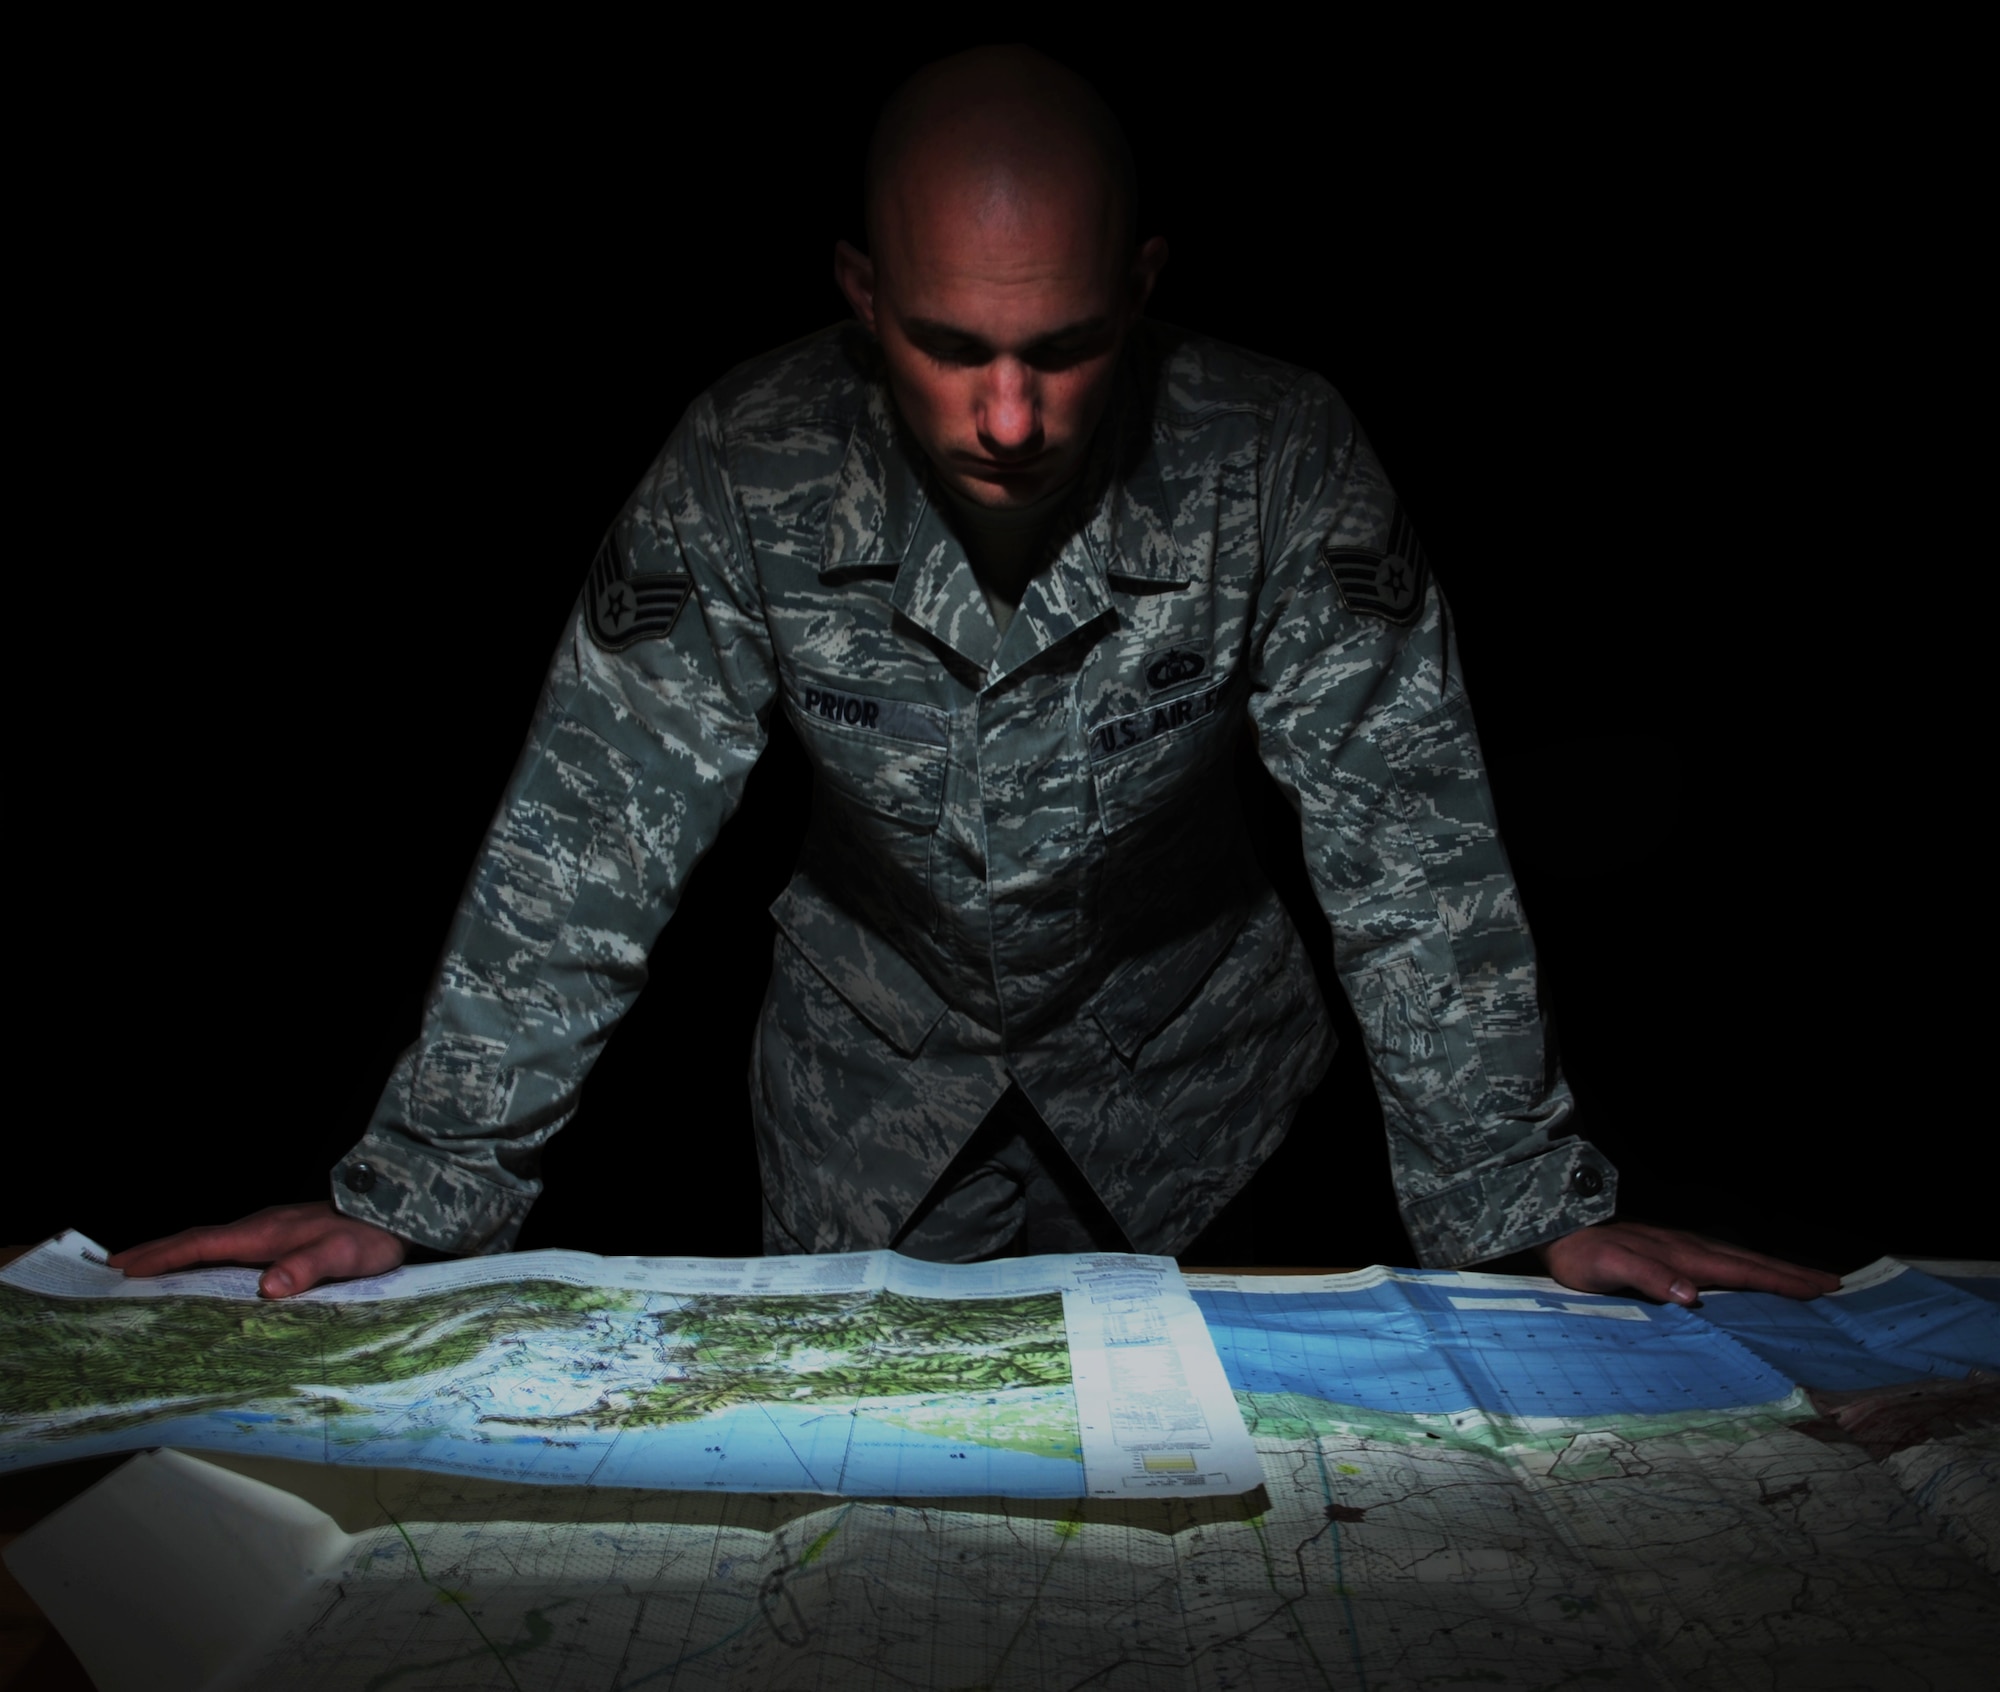 Staff Sgt. Darrell Prior, a Command Terminal Instrument Procedures (TERPS) specialist with Air Mobility Command, examines a map of Columbia at MacDill Air Force Base, Fla., Feb. 2, 2016. As a whole, the MacDill TERPS office ensures all Department of Defense aircraft safely land in Central America, South America, the Caribbean and Mexico by evaluating the host nation’s procedures and applying Air Force criteria. (U.S. Air Force photo illustration by Senior Airman Danielle Quilla)